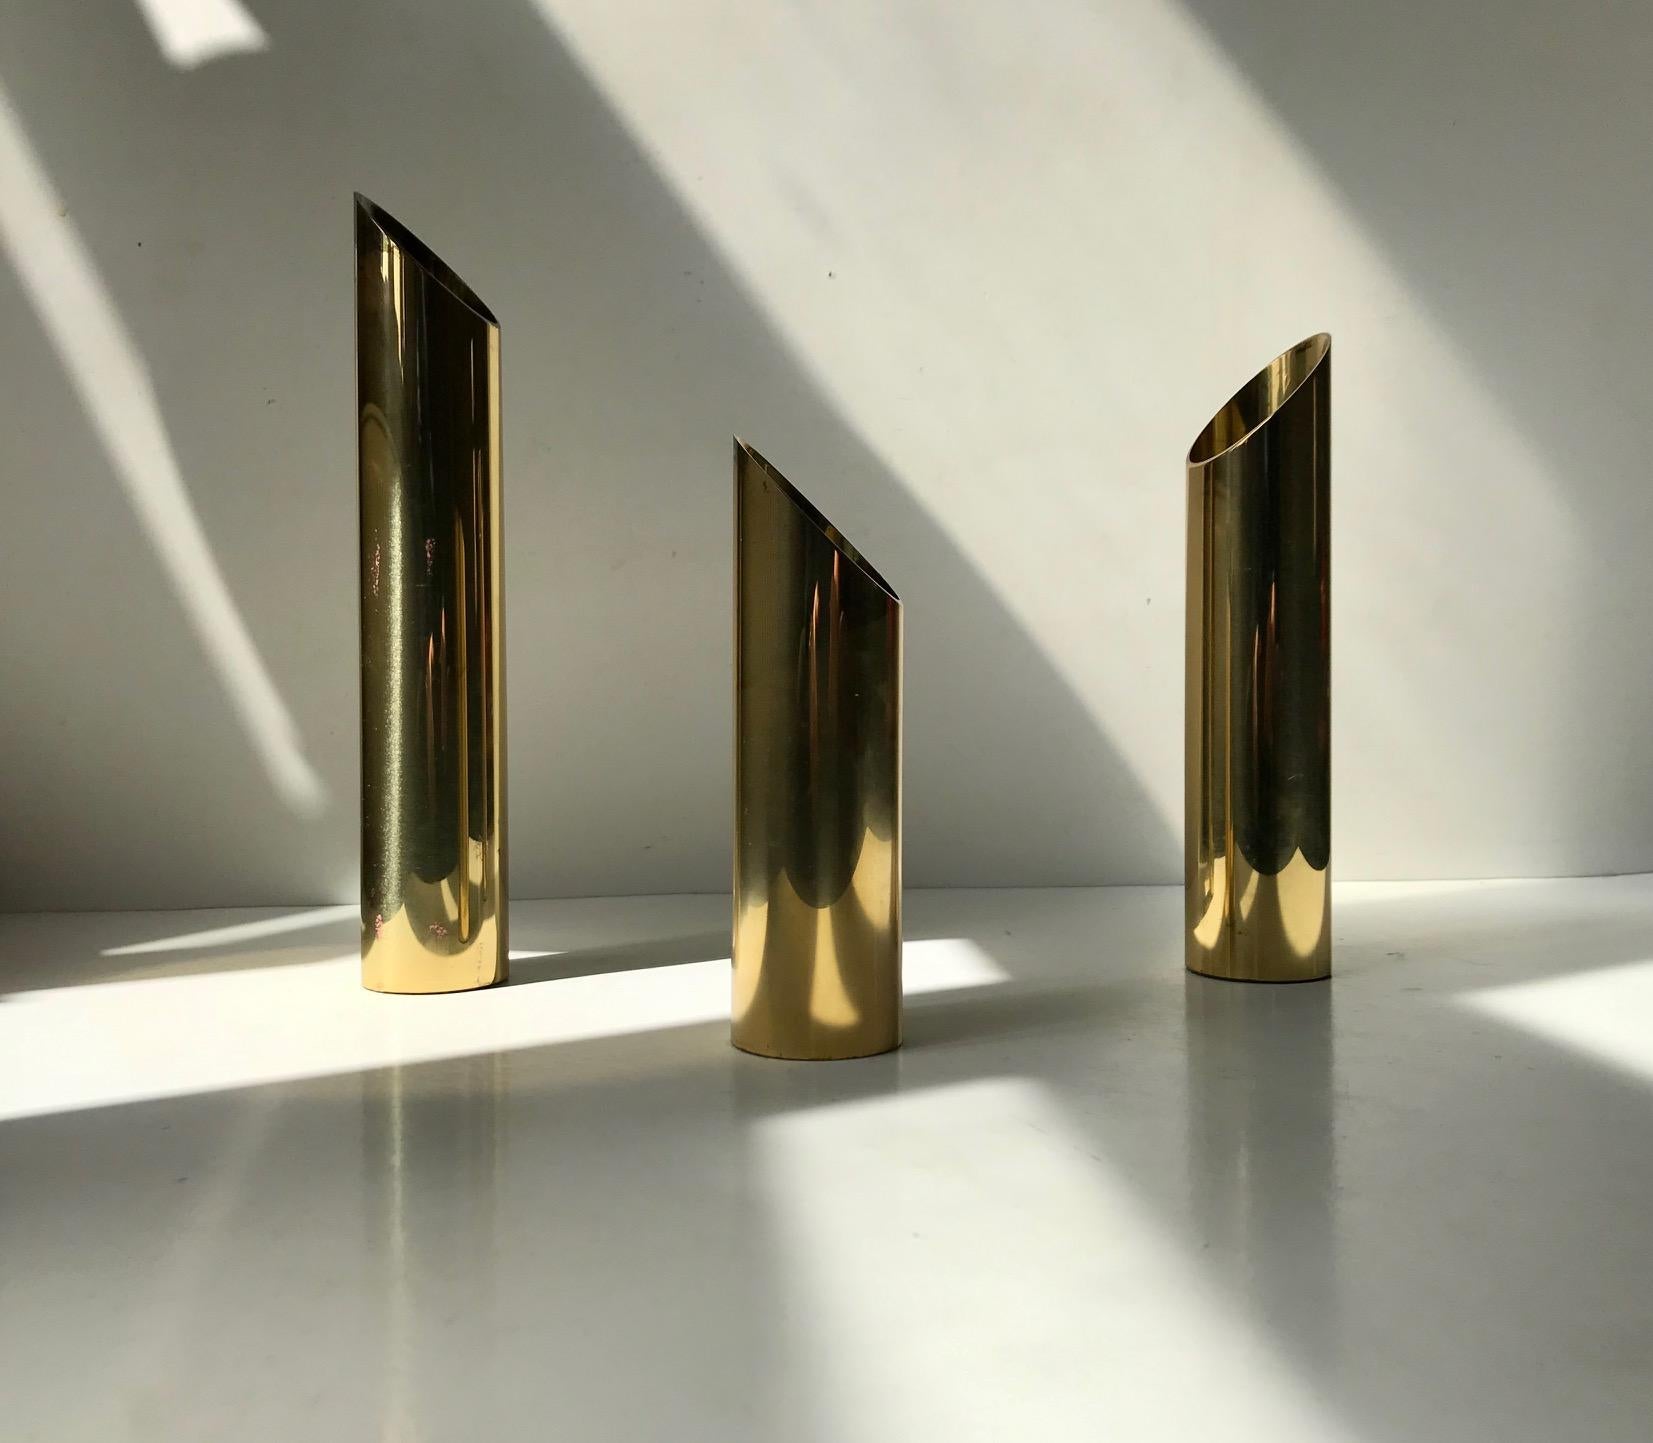 A set of 3 Danish modern tea light candleholders. Made from pipe shaped solid brass in 3 diffrent heights. The tea lights are 'resting' in such a way that only the flame is visible. Alternatively they can also be installed with church/bloc candles.